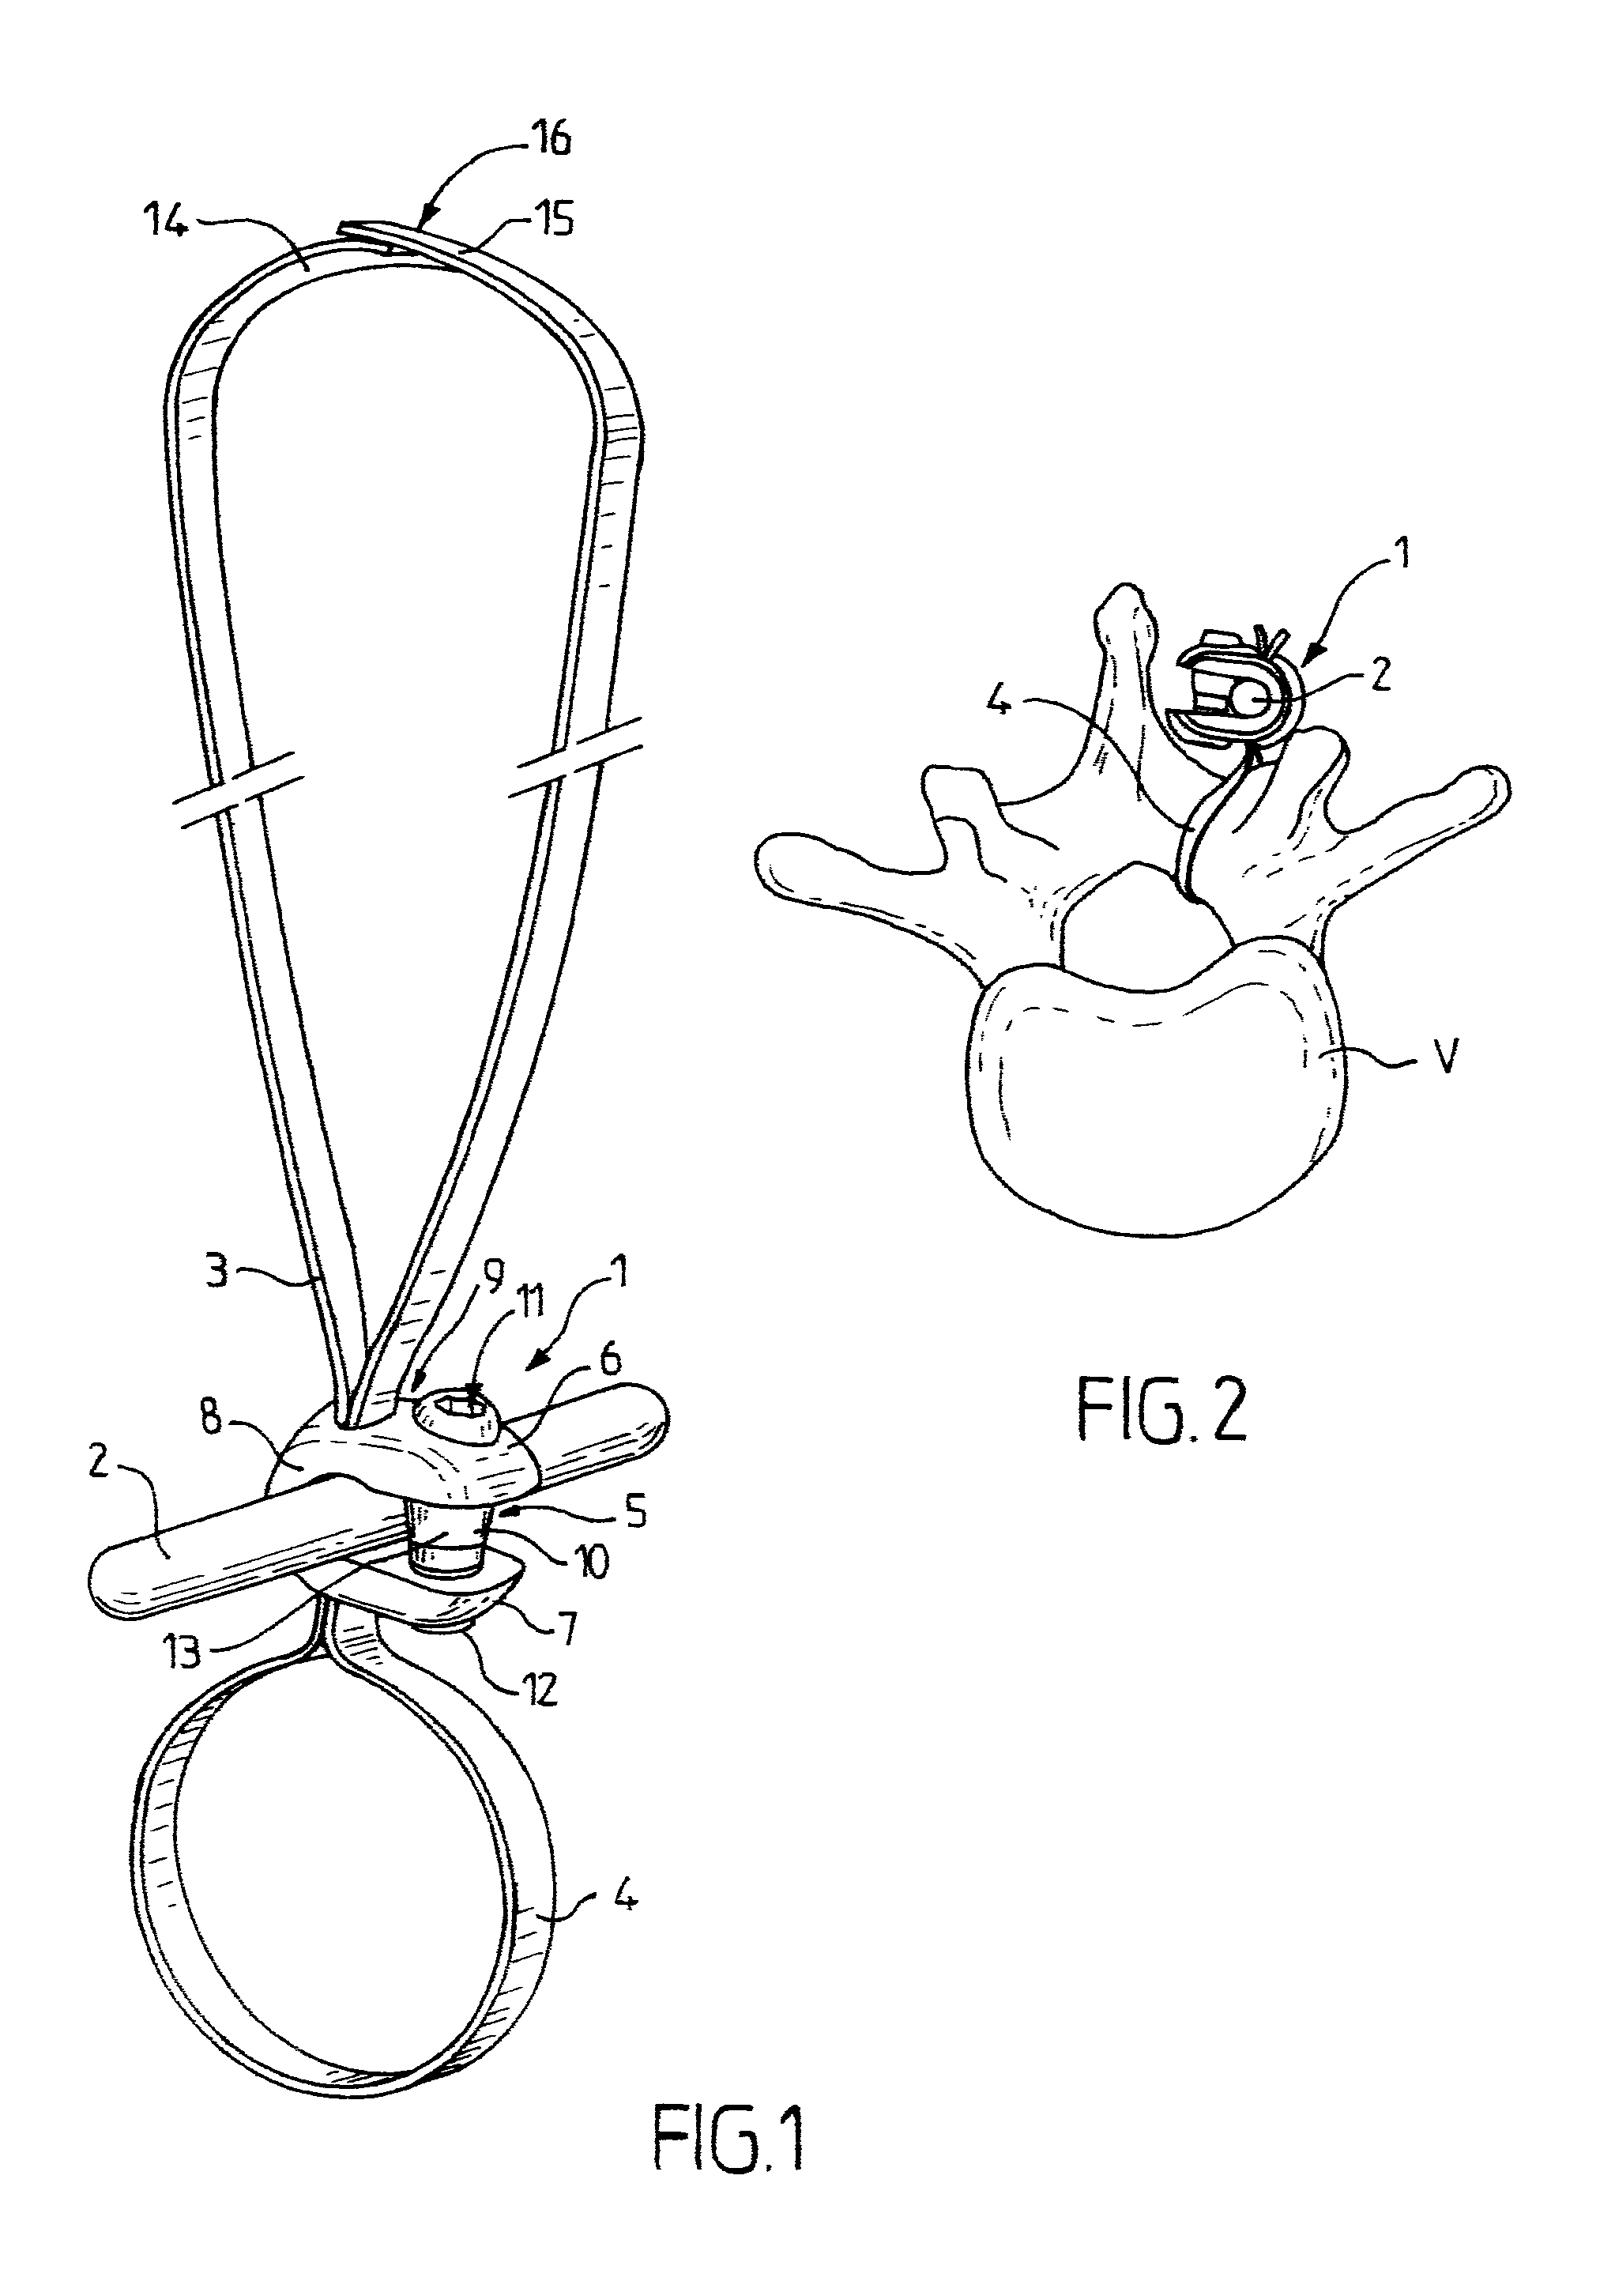 Device for tensioning a flexible band